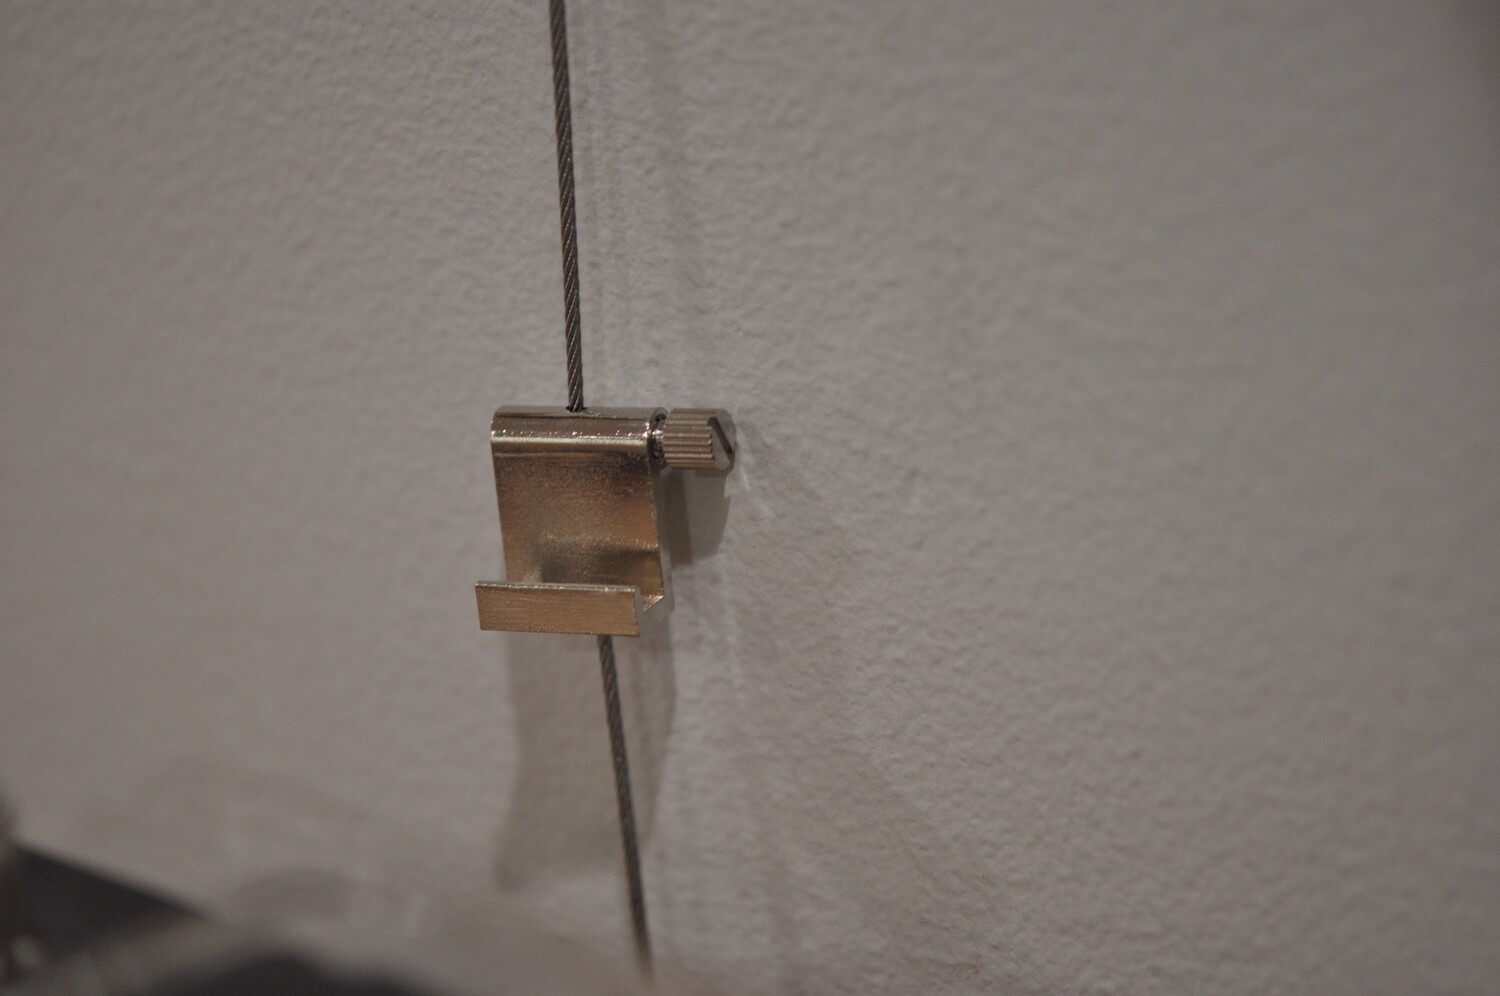 Gallery Art Rail: Hooks and Clamps